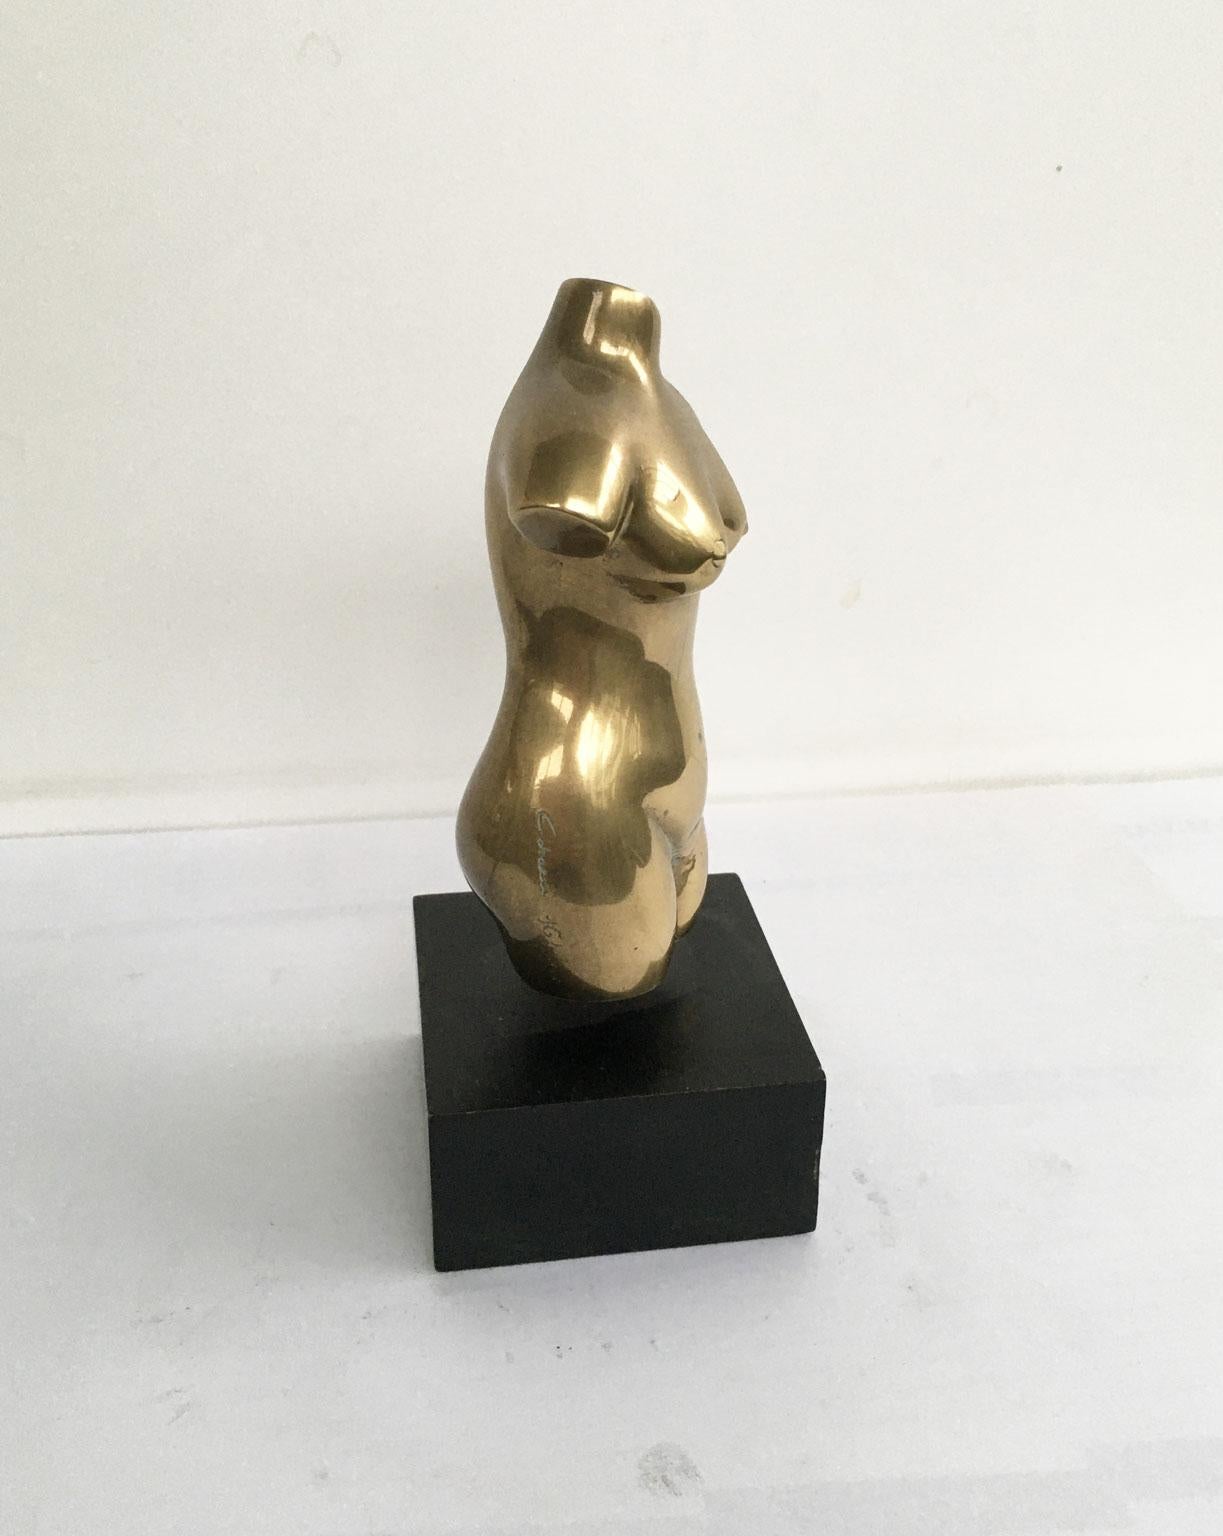 This engaging bronze artwork was created by the Italian artist Cristiana Isoleri. This is a multiple of 1.000 specimens, numbered and signed. The title is 